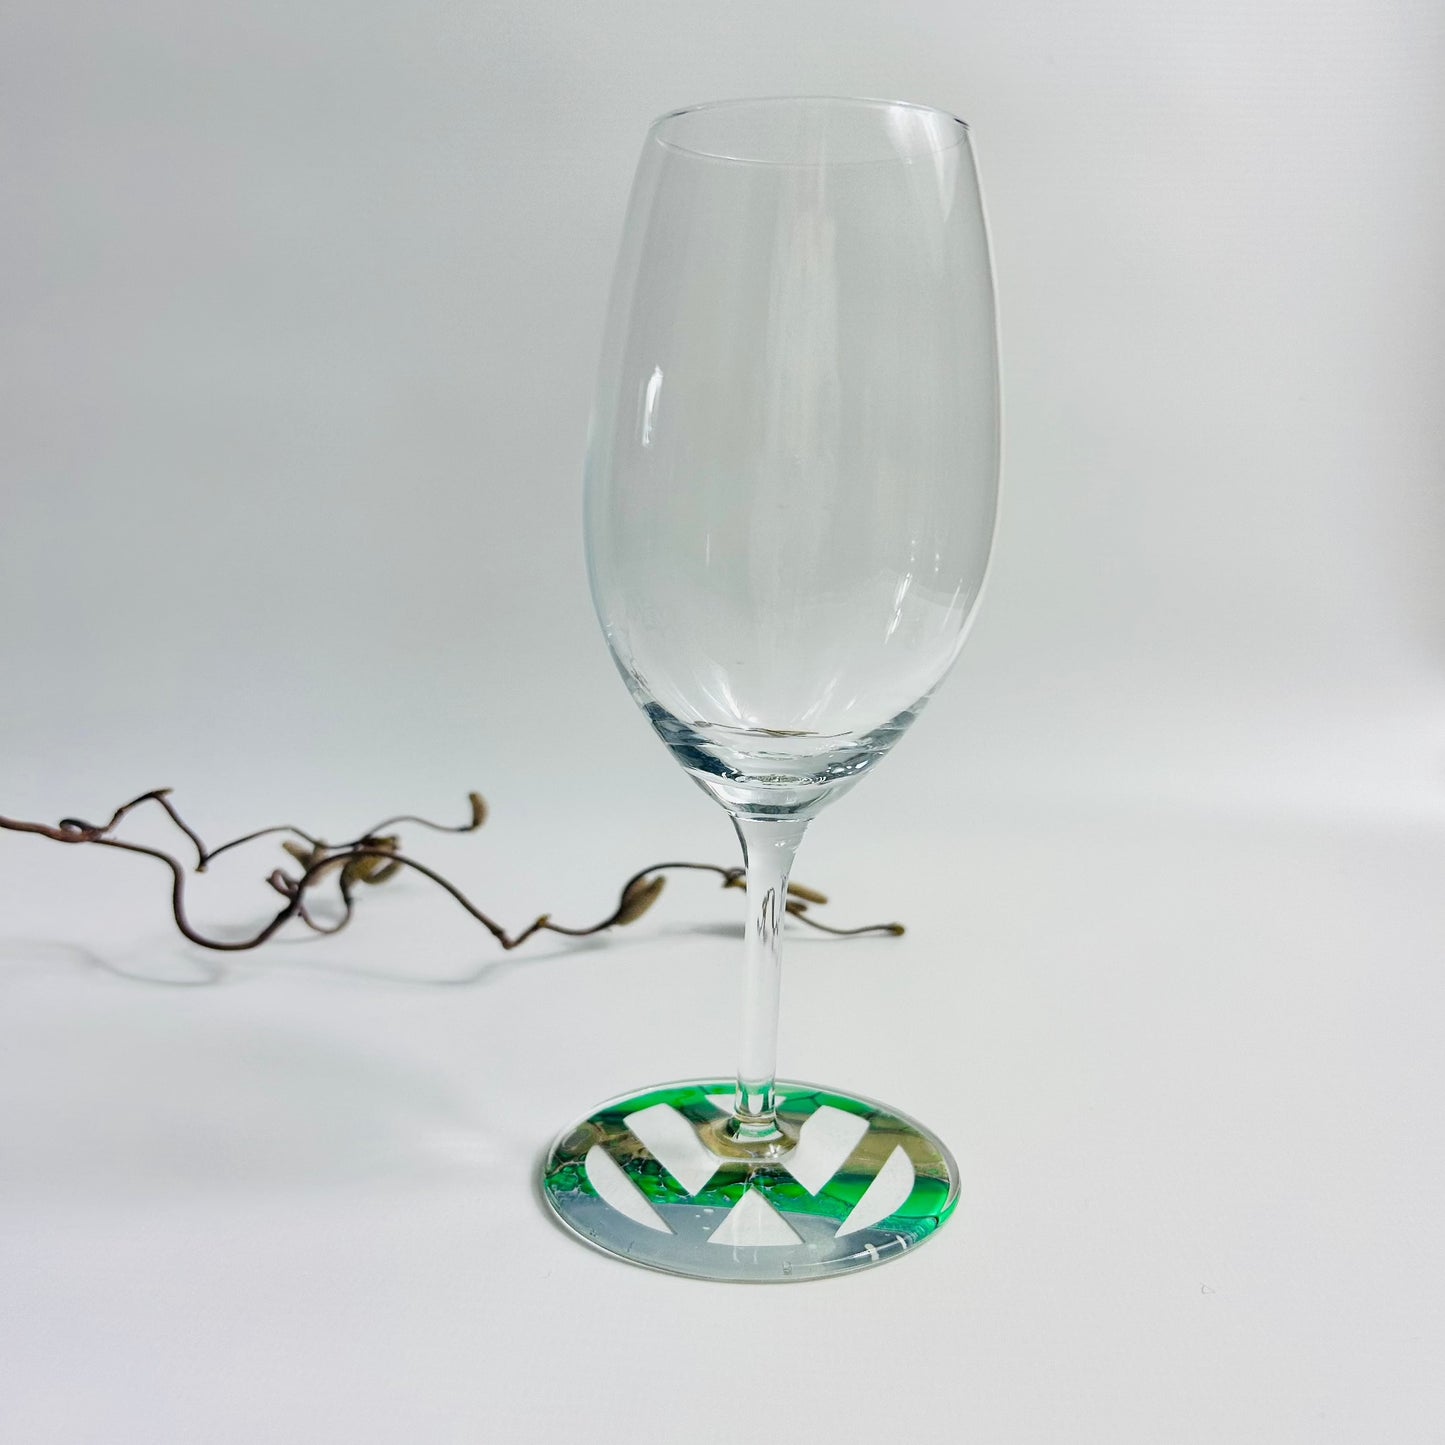 Prosecco glass with green fluid art logo on the base, sealed with resin